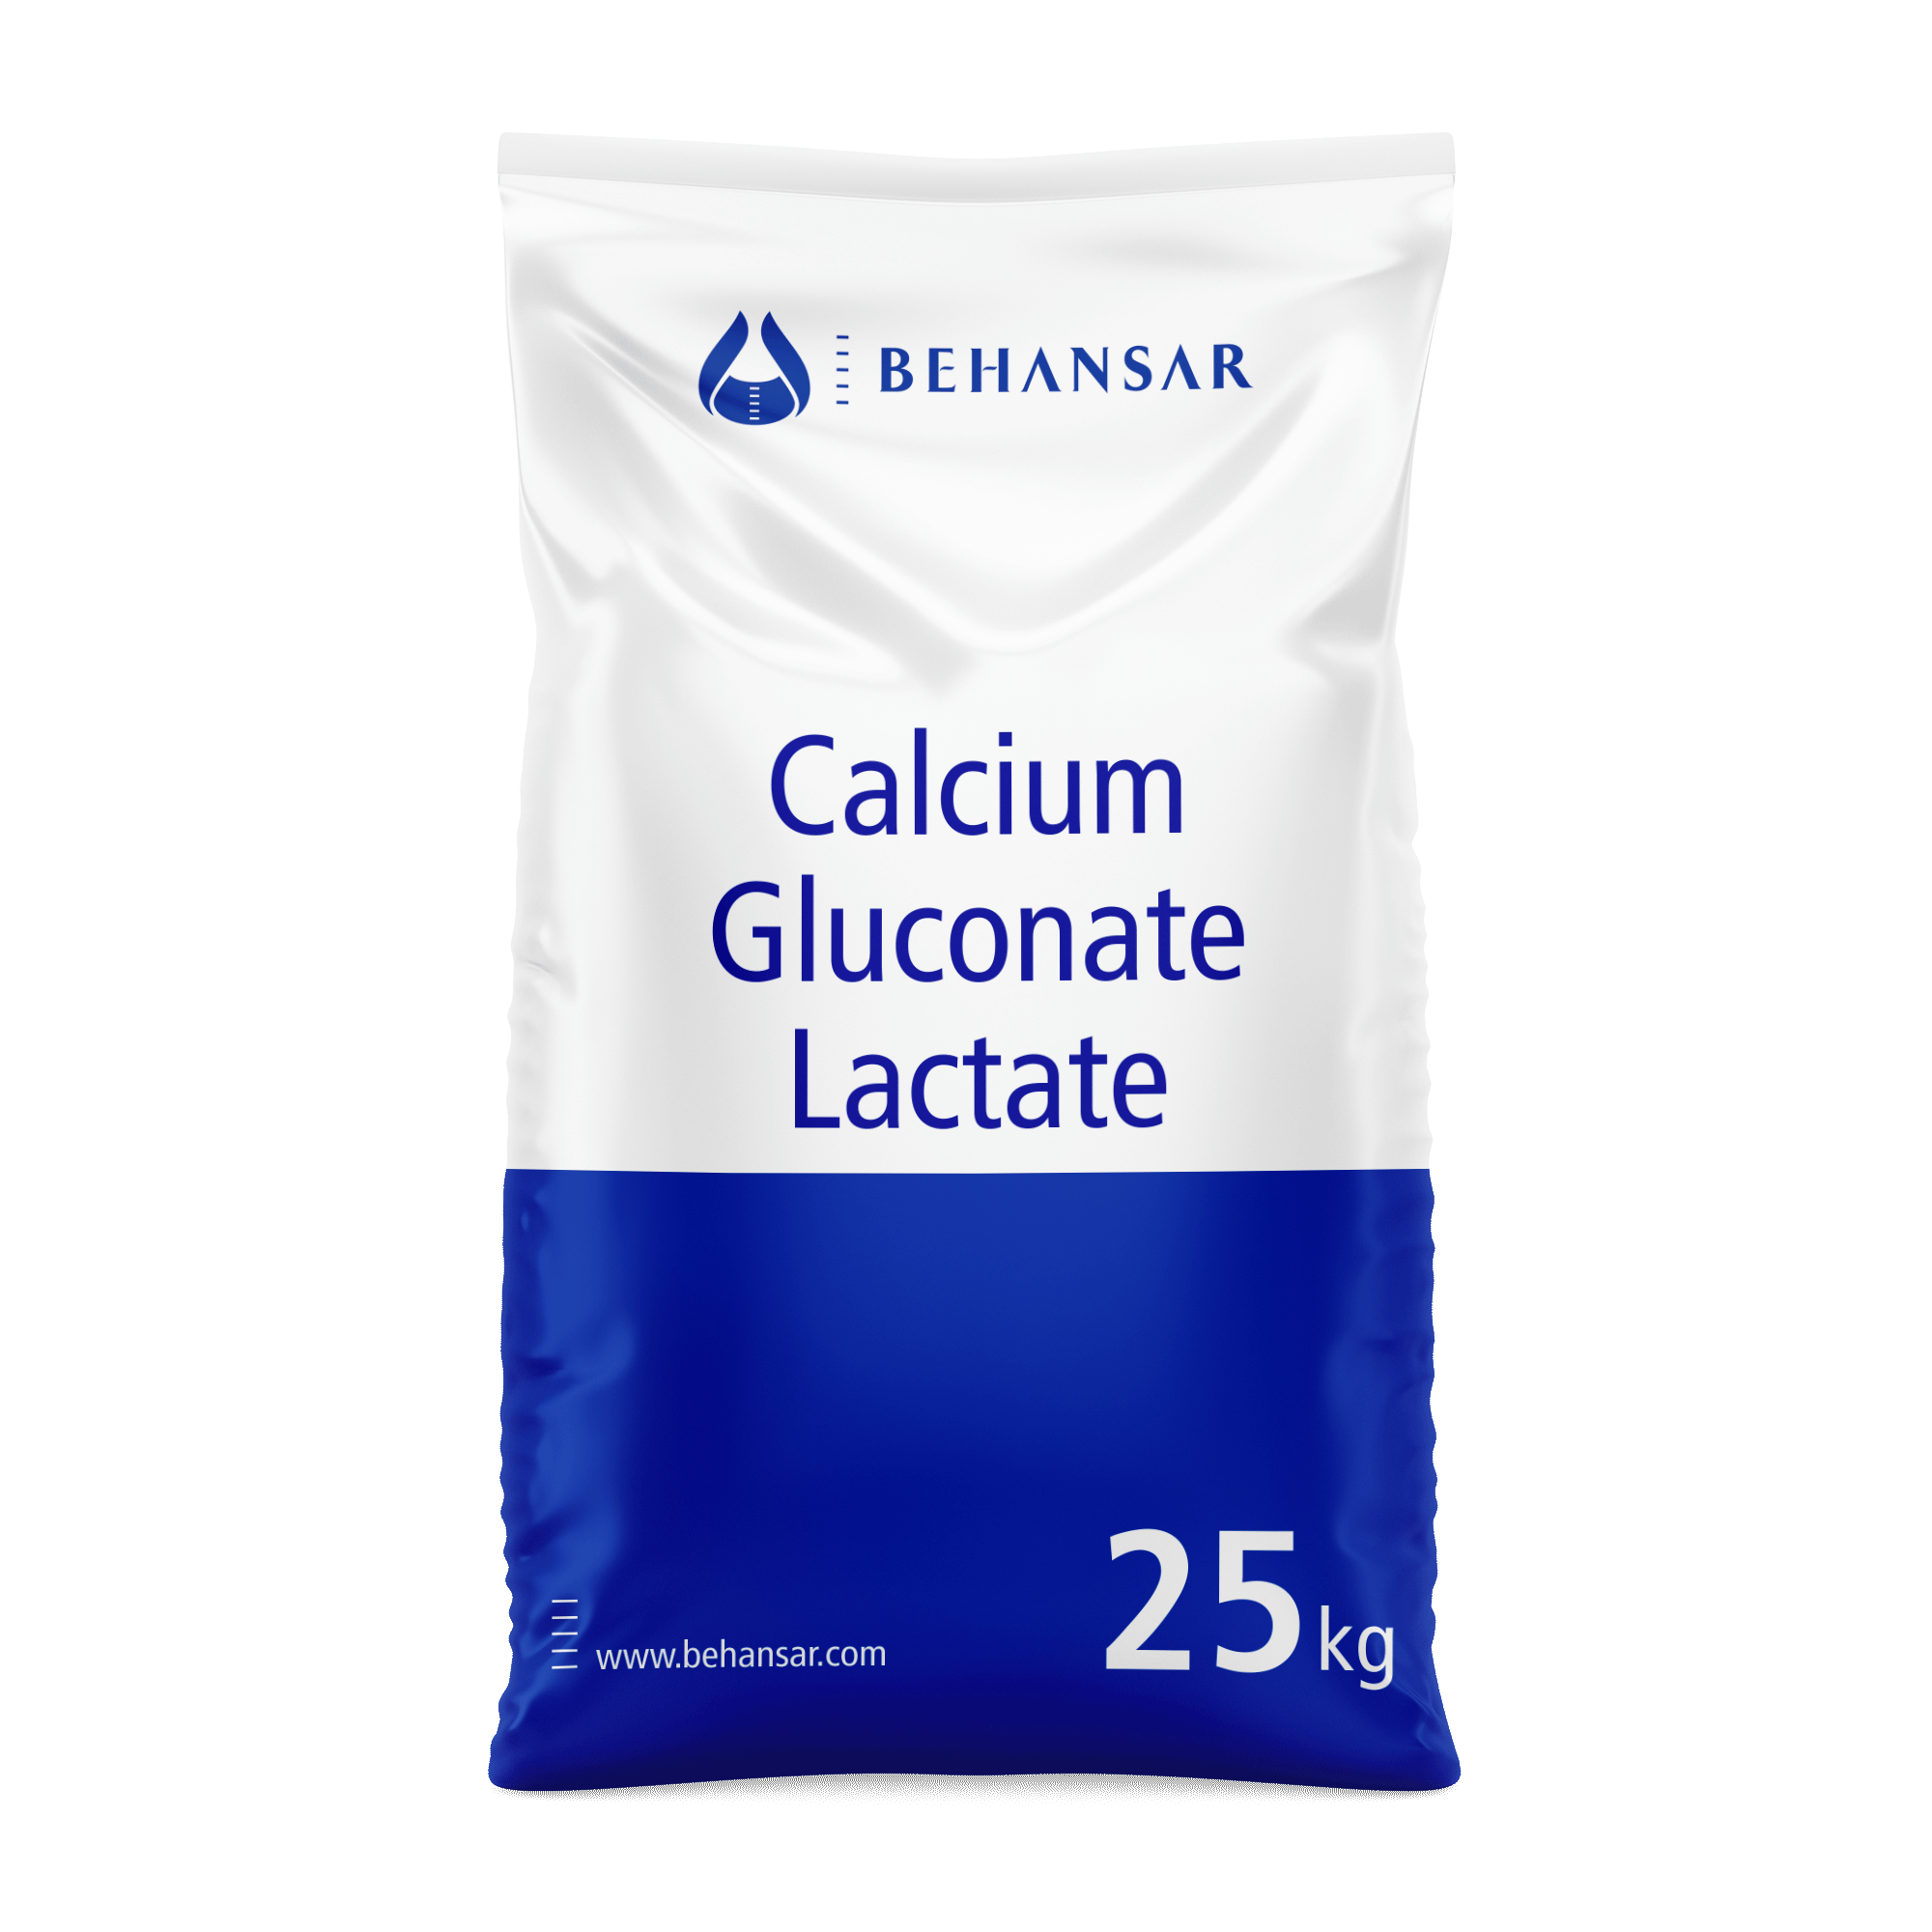 Calcium Gluconate Lactate is one of the products of Behansar Co